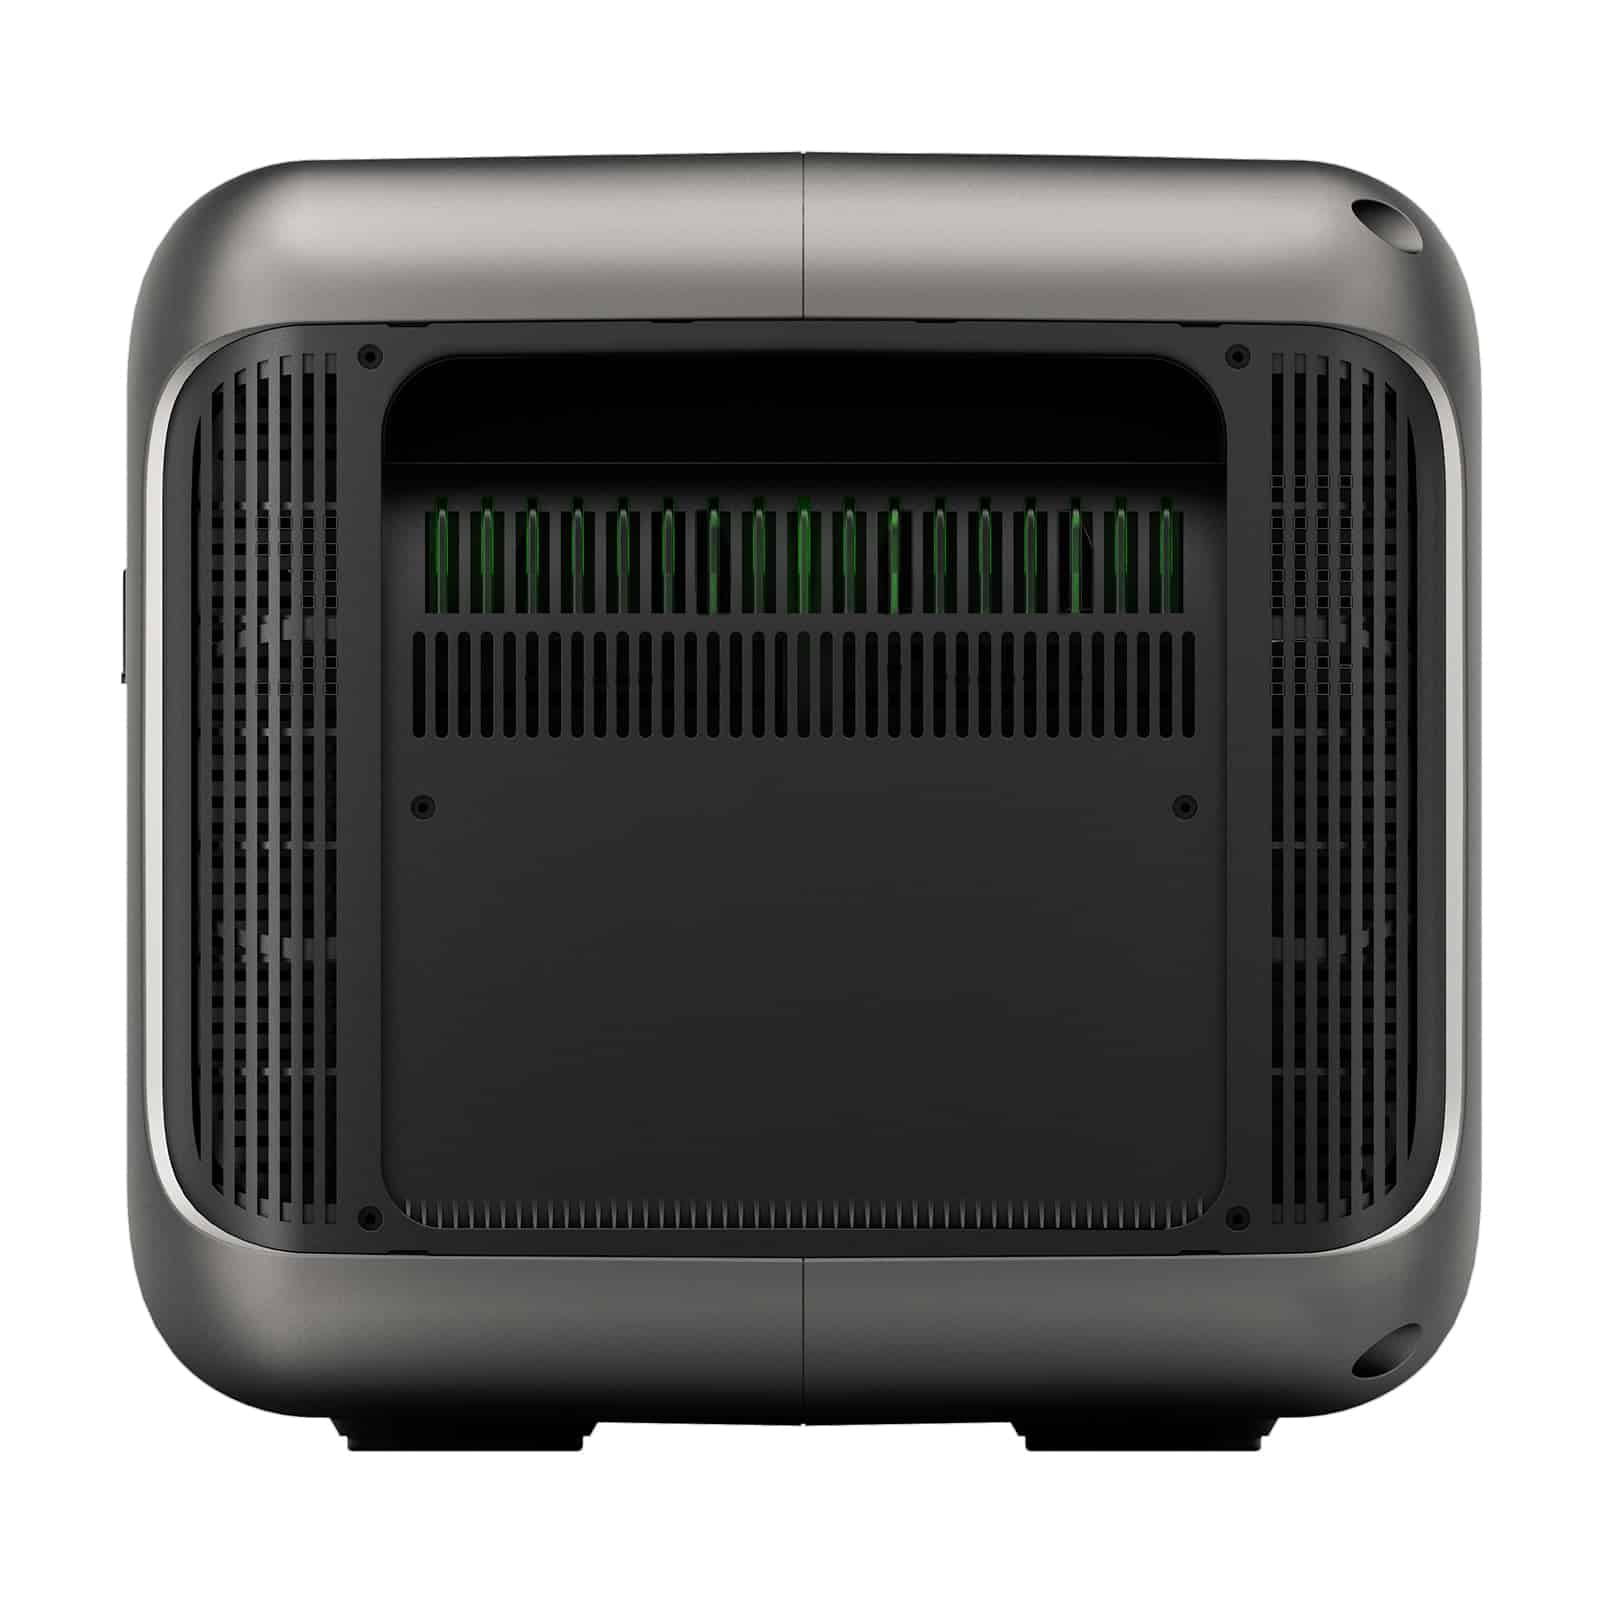 ALLPOWERS R3500 Home Backup Power Station 3200W 3168Wh Review